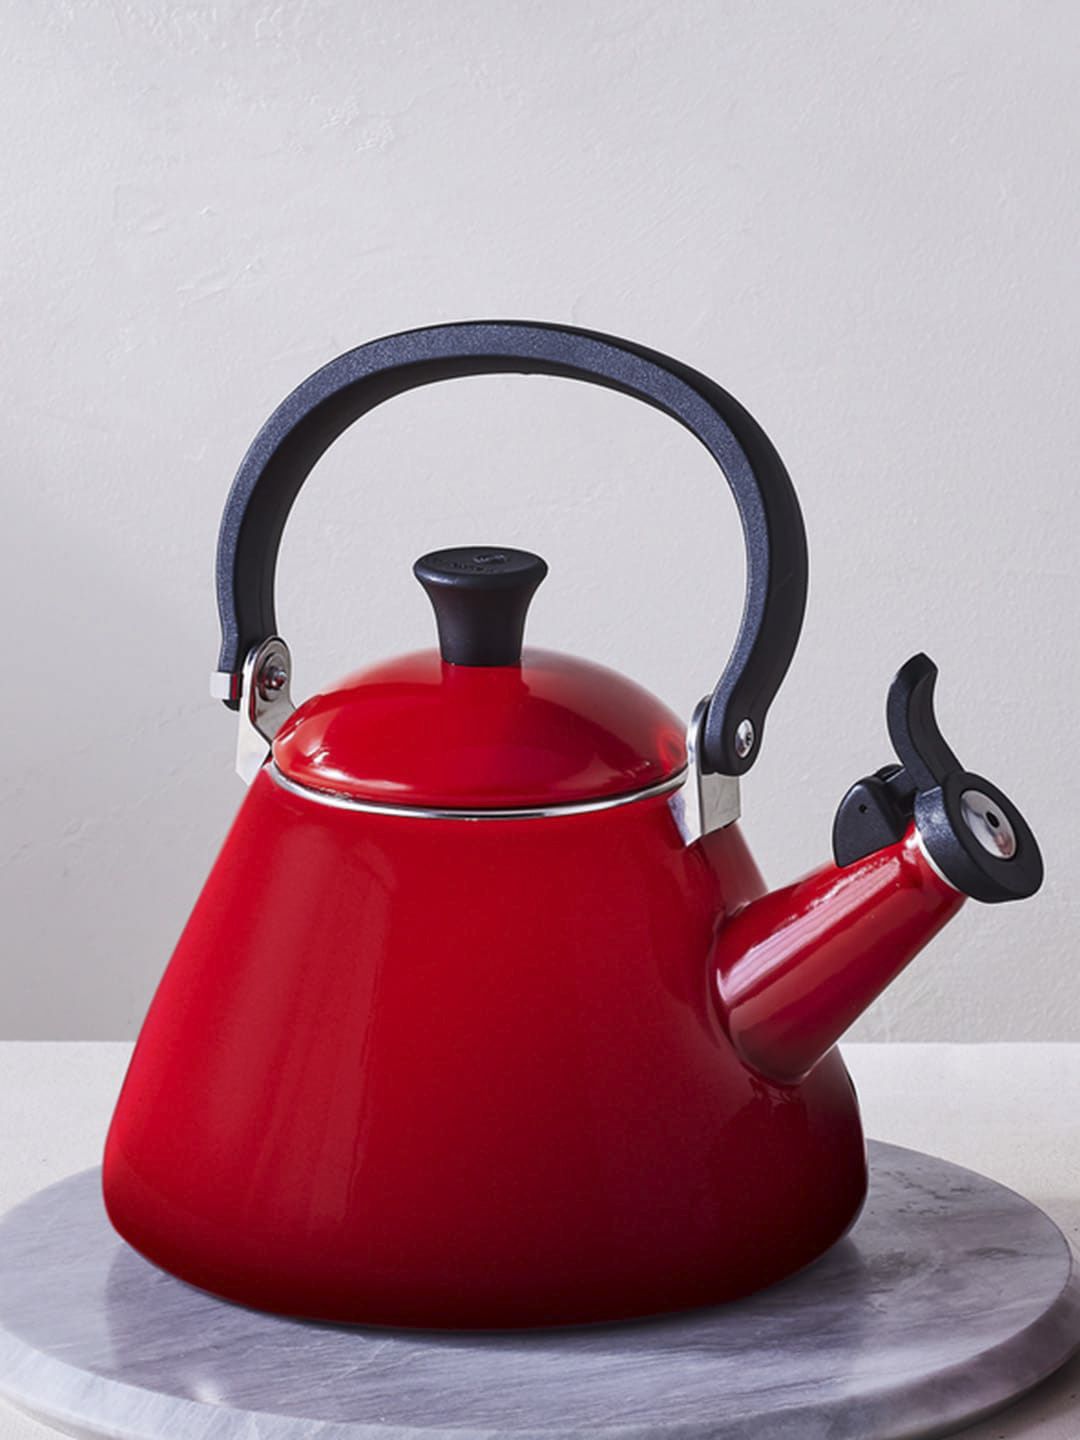 Le Creuset Red Kone Kettle Cerise Price in India